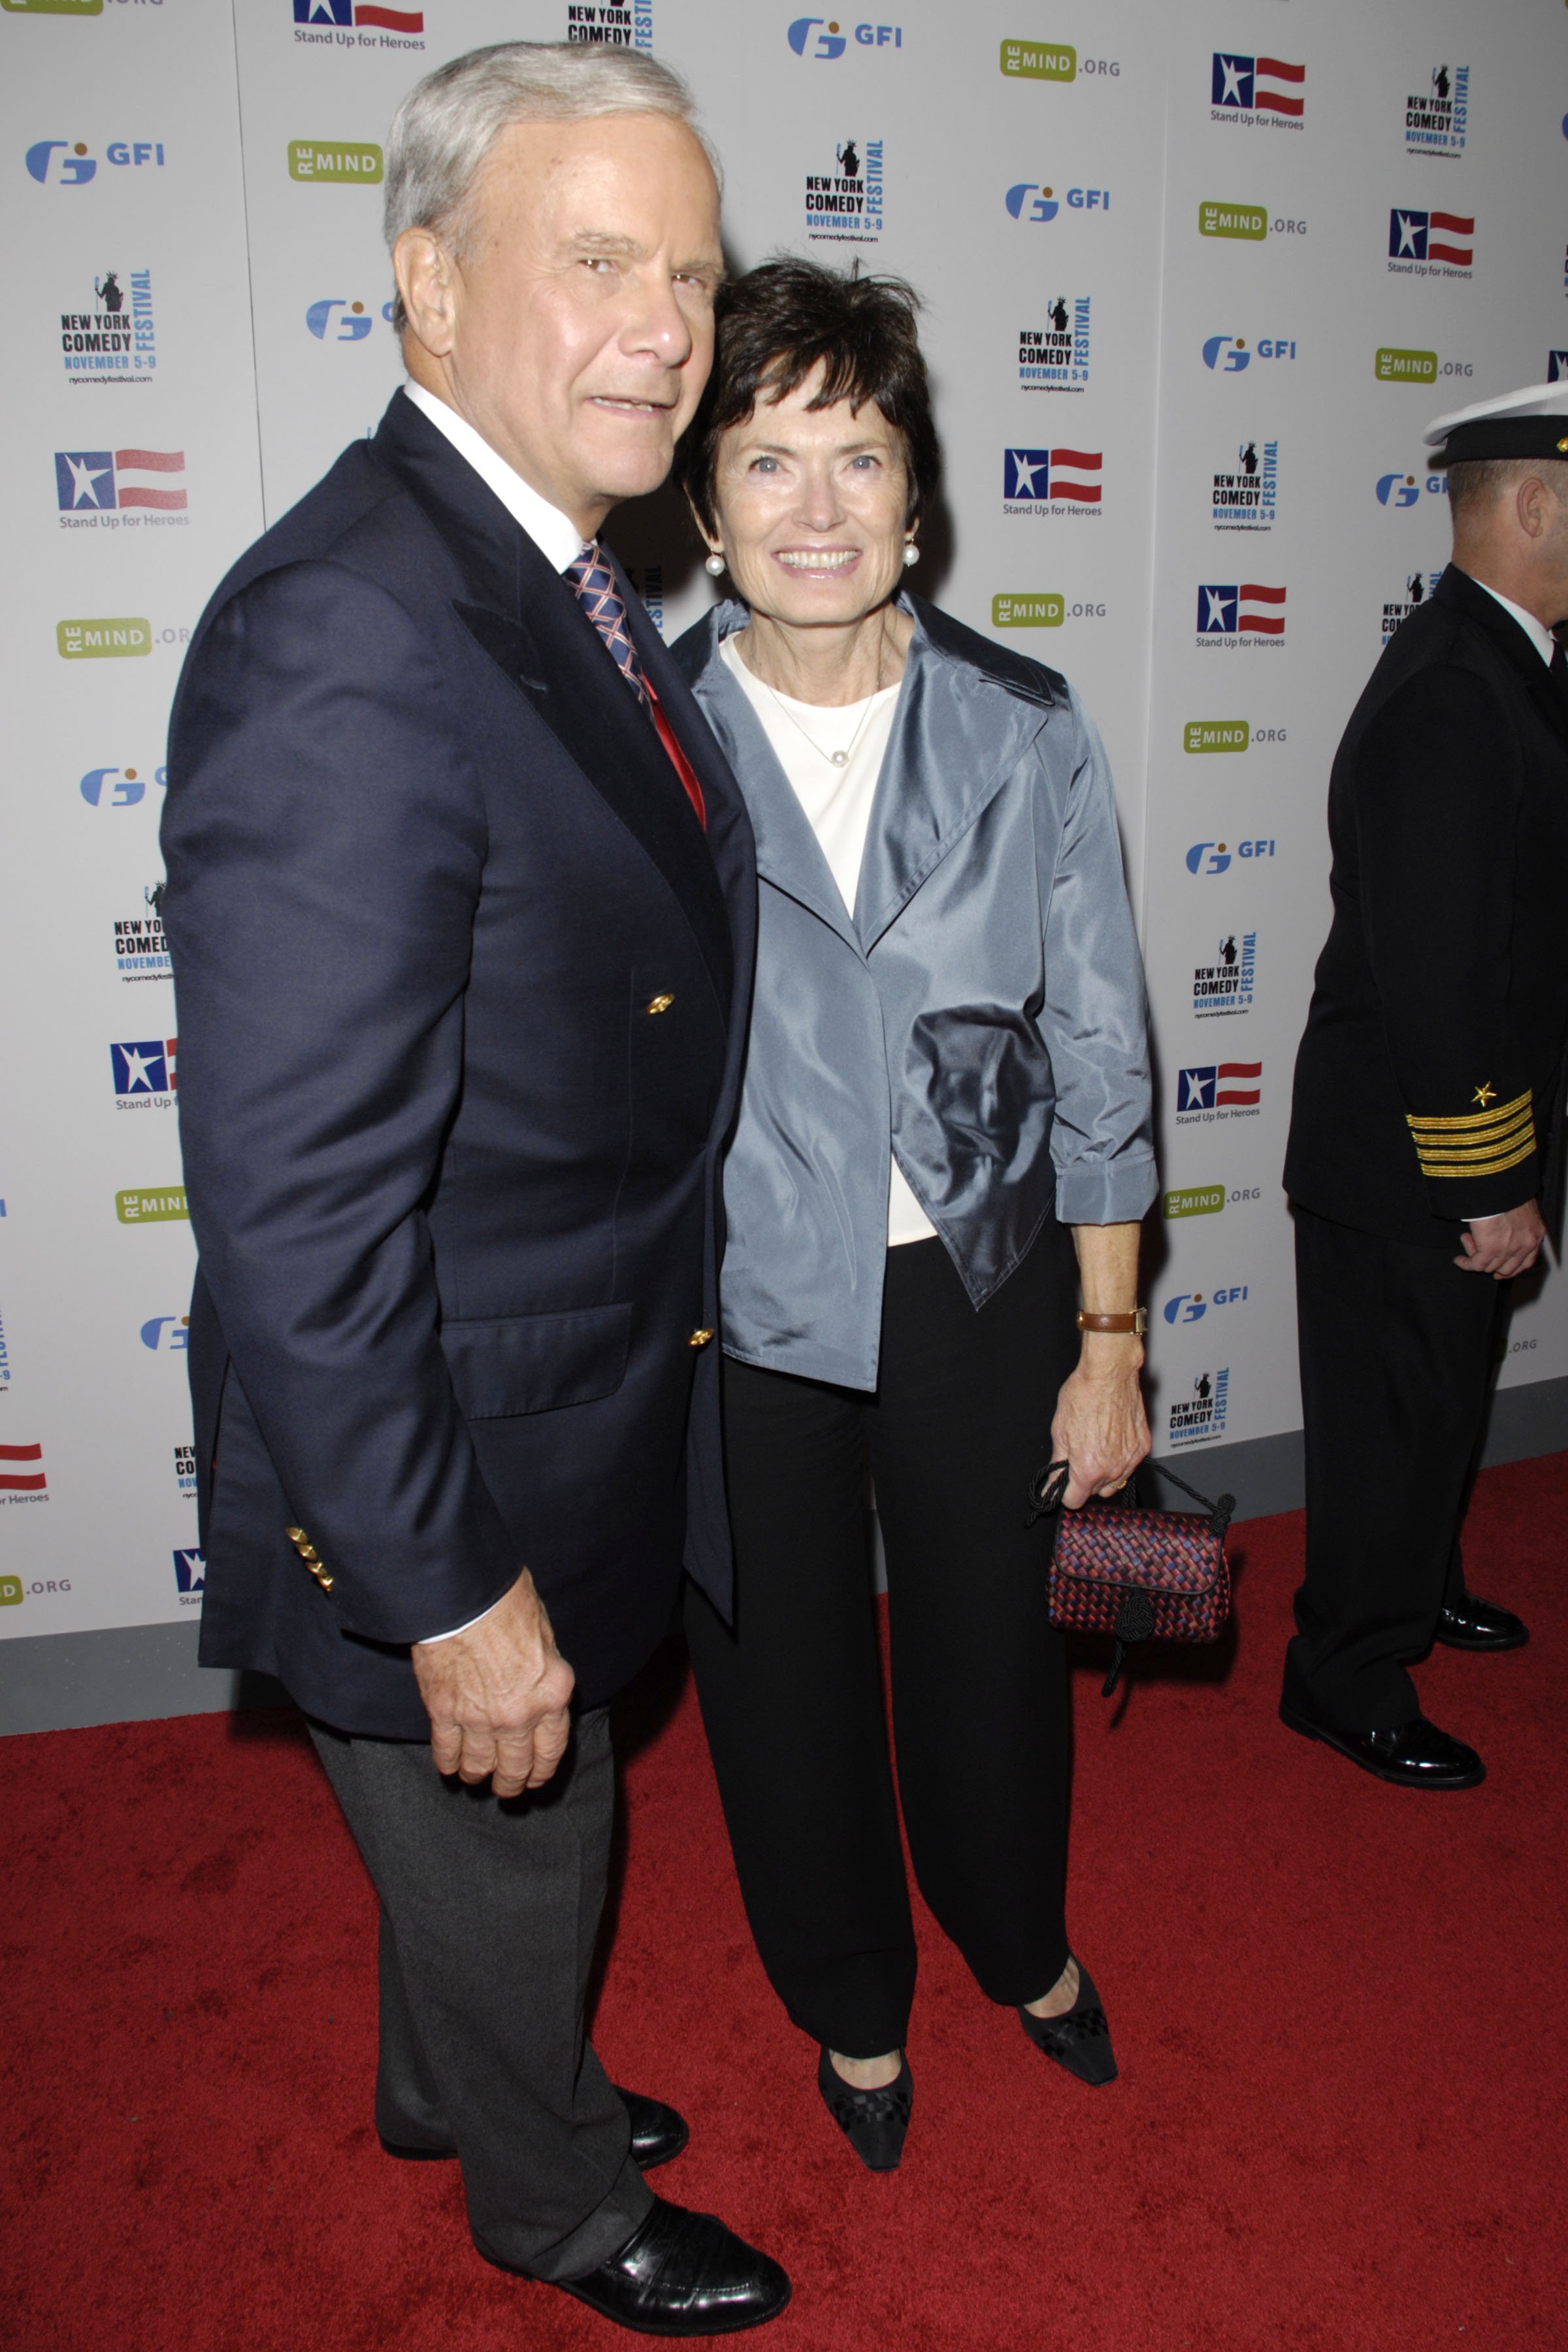  Tom Brokaw and Meredith Lynn Auld attend STAND UP FOR HEROES, an Evening of Comedy to Benefit the BOB WOODRUFF FOUNDATION at Town Hall on November 5, 2008 in New York City. | Source: Getty Images